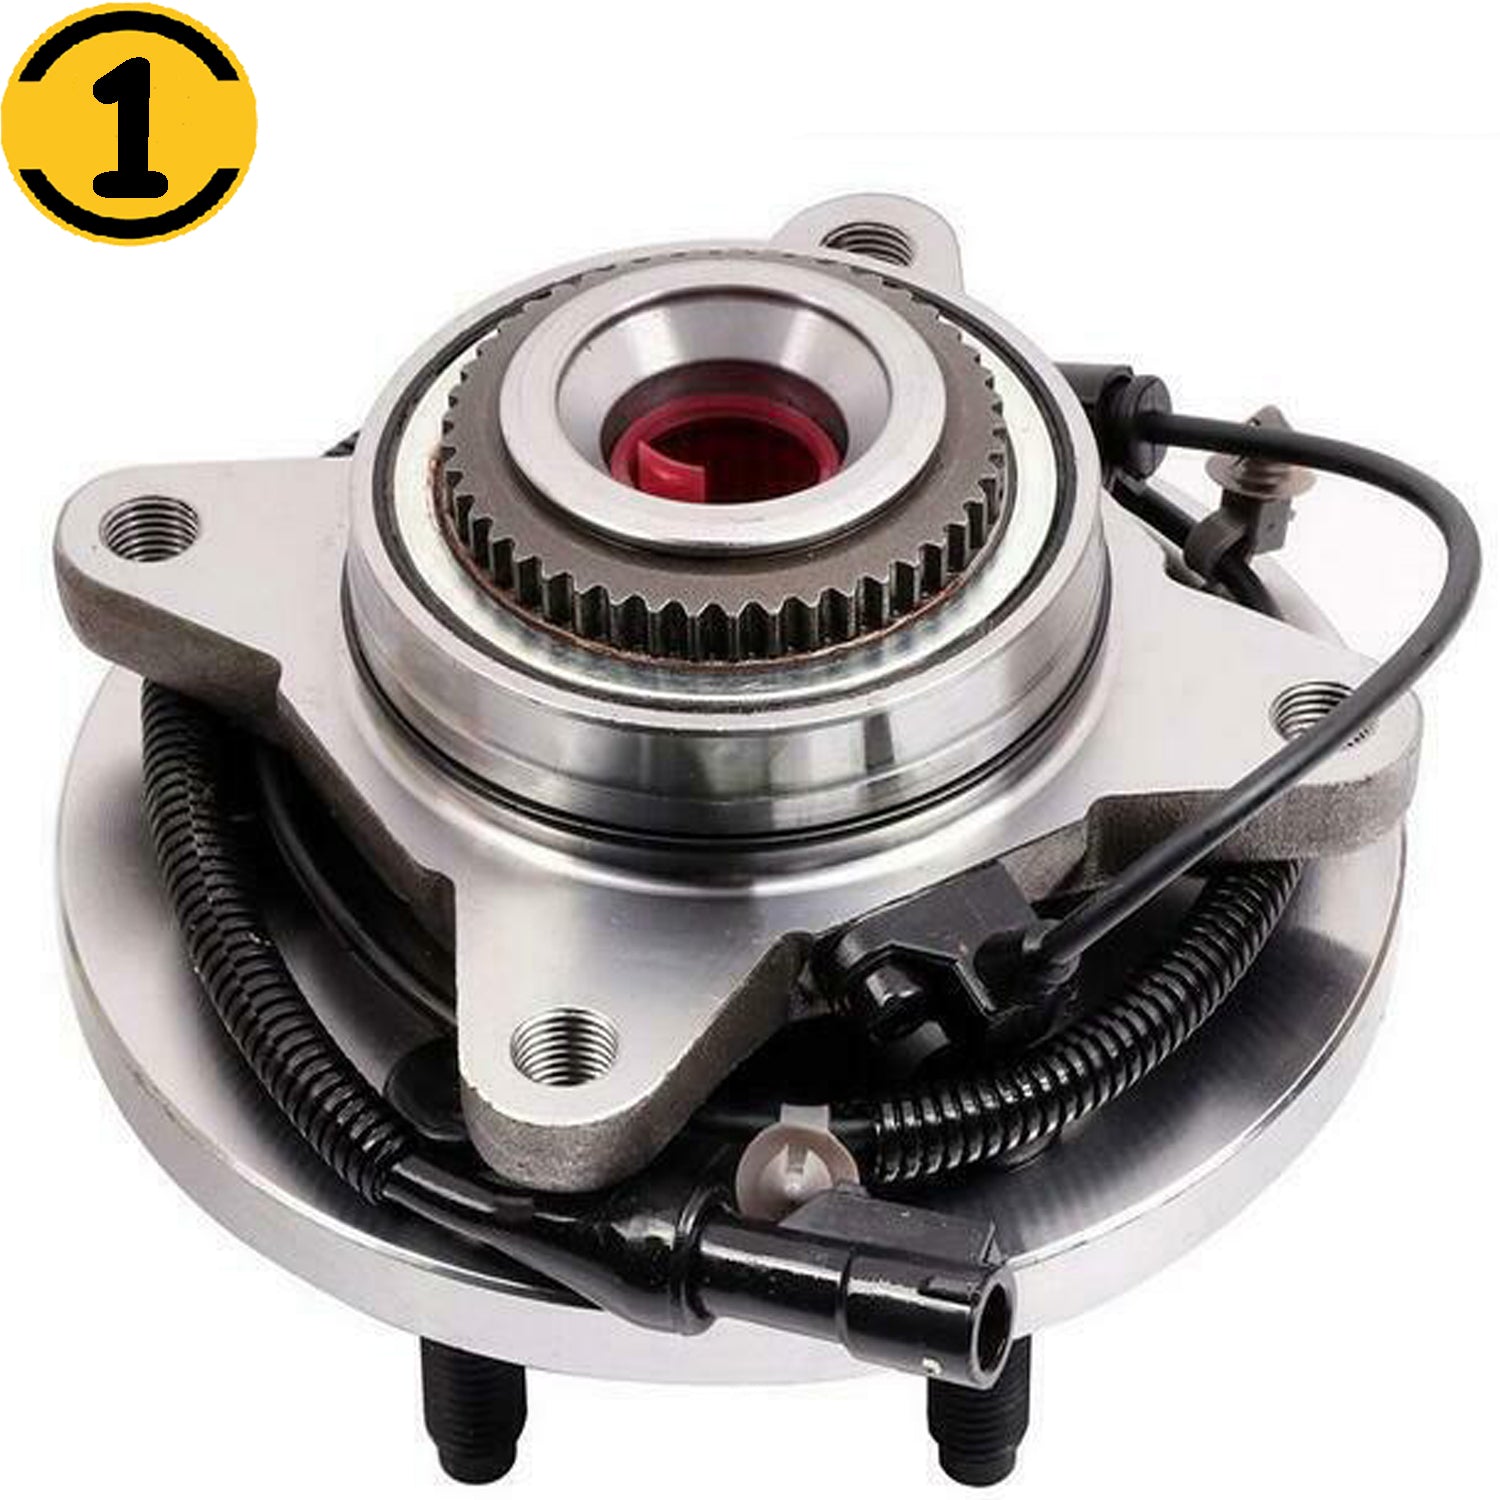 JADODE 515119 4WD Front Wheel Bearing and Hub For 2009 2010 Ford F-150 4.2L 4.6L 5.4L